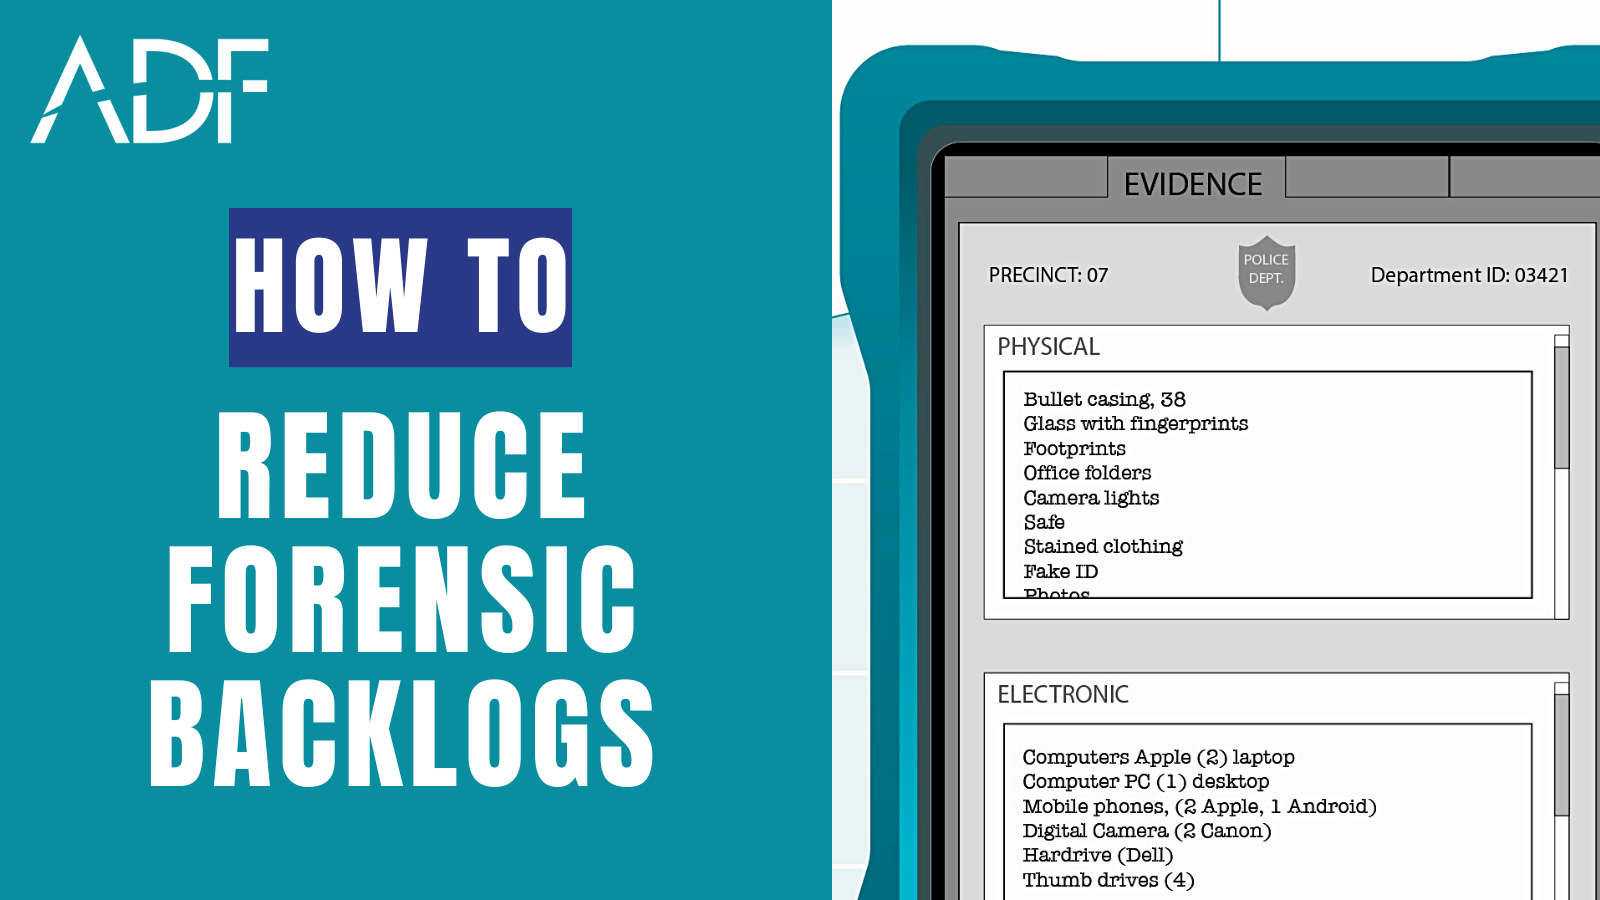 Digital Forensics Lab: How to Reduce Forensic Backlogs